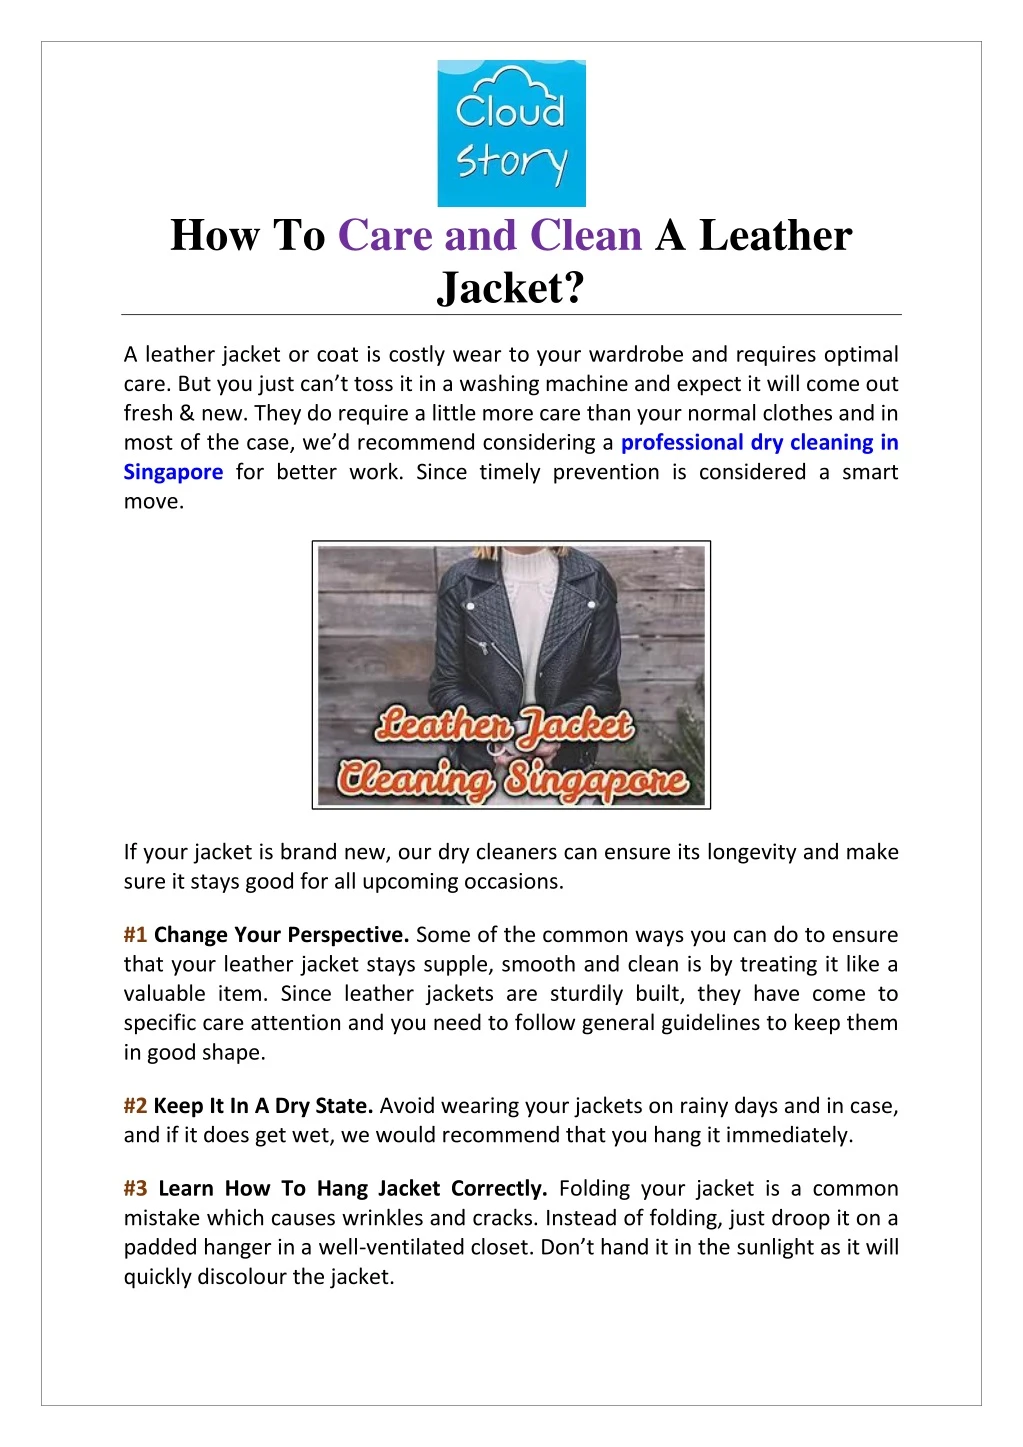 how to care and clean a leather jacket